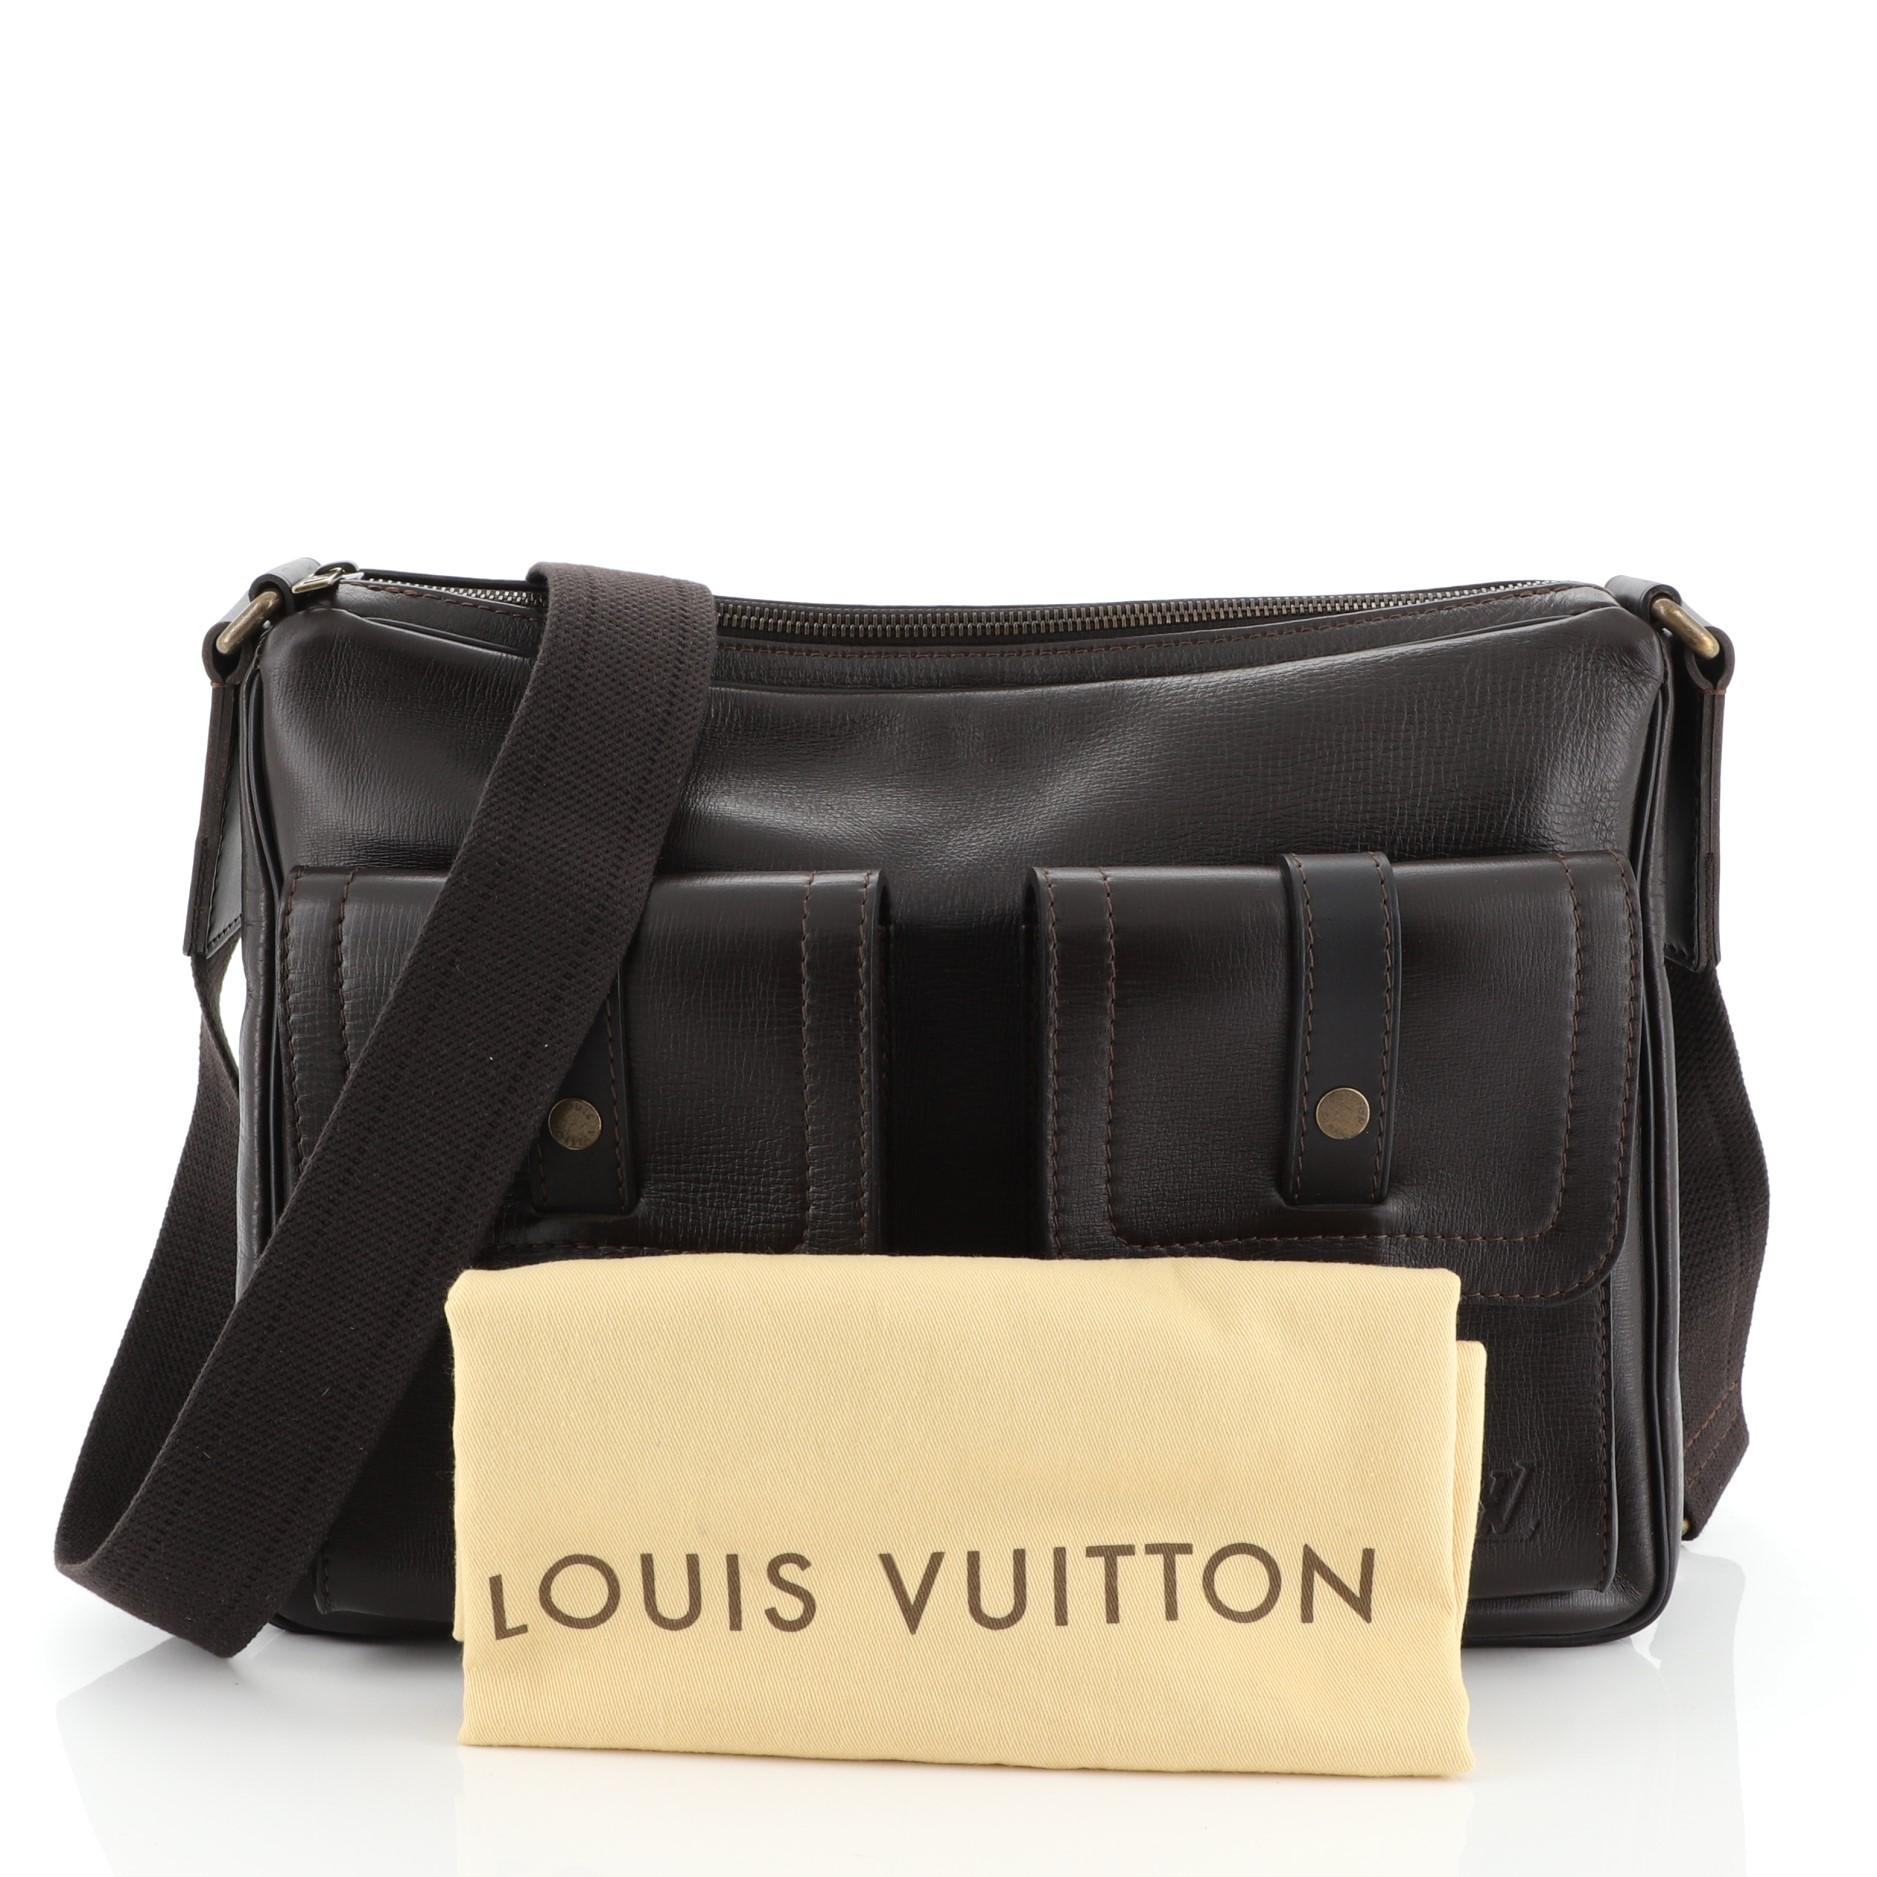 This Louis Vuitton Wichita Utah Leather, crafted in brown leather, features an adjustable canvas strap, two exterior flap pockets and aged gold-tone hardware. Its zip closure opens to a brown fabric interior with slip pockets. Authenticity code